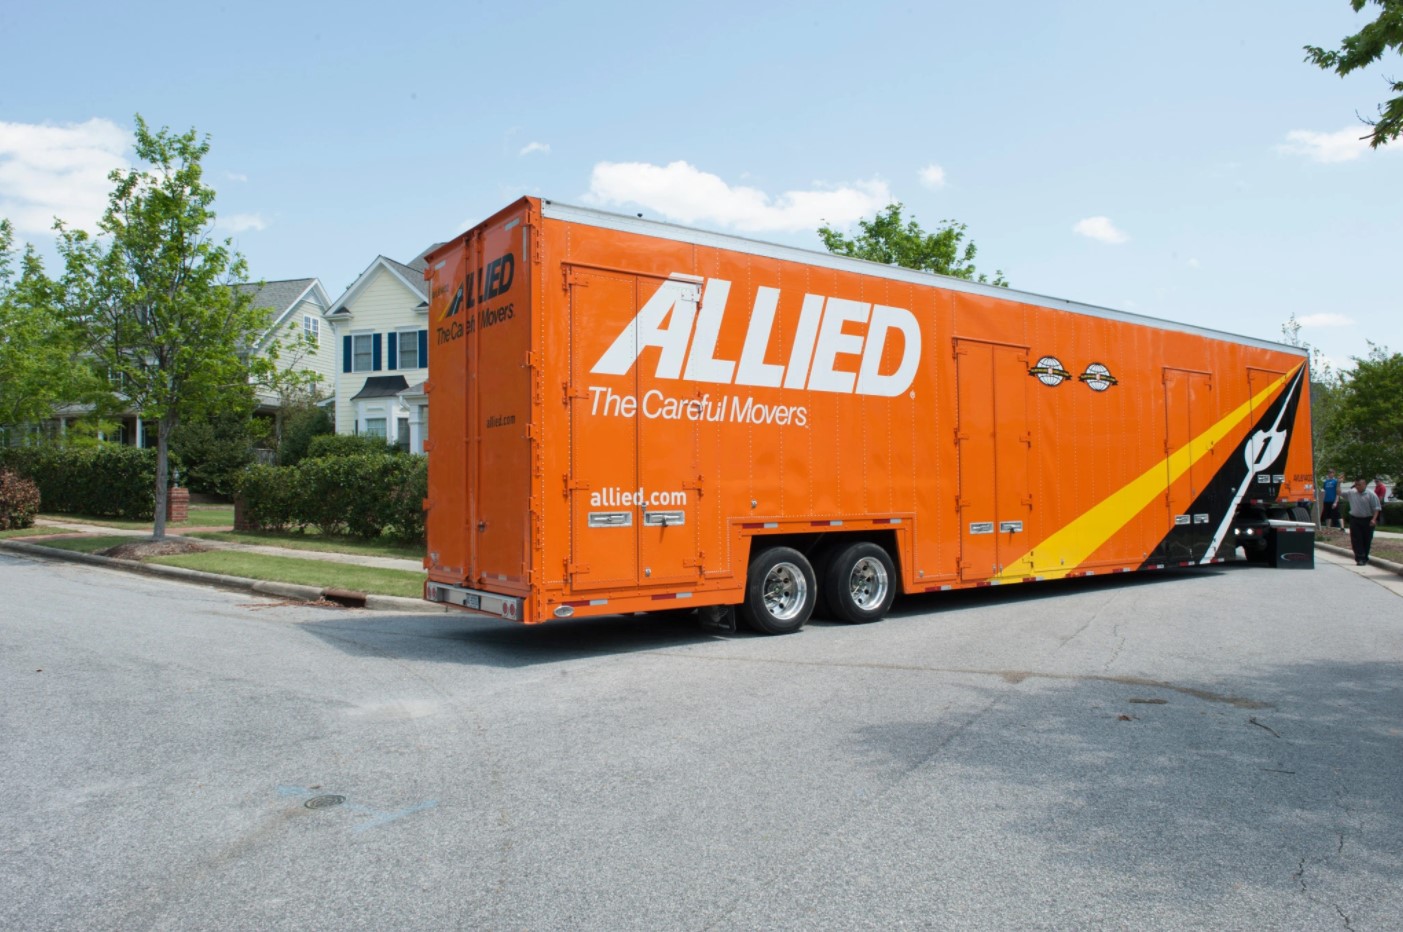 Allied Semi-Truck Traveling on a Residential Street